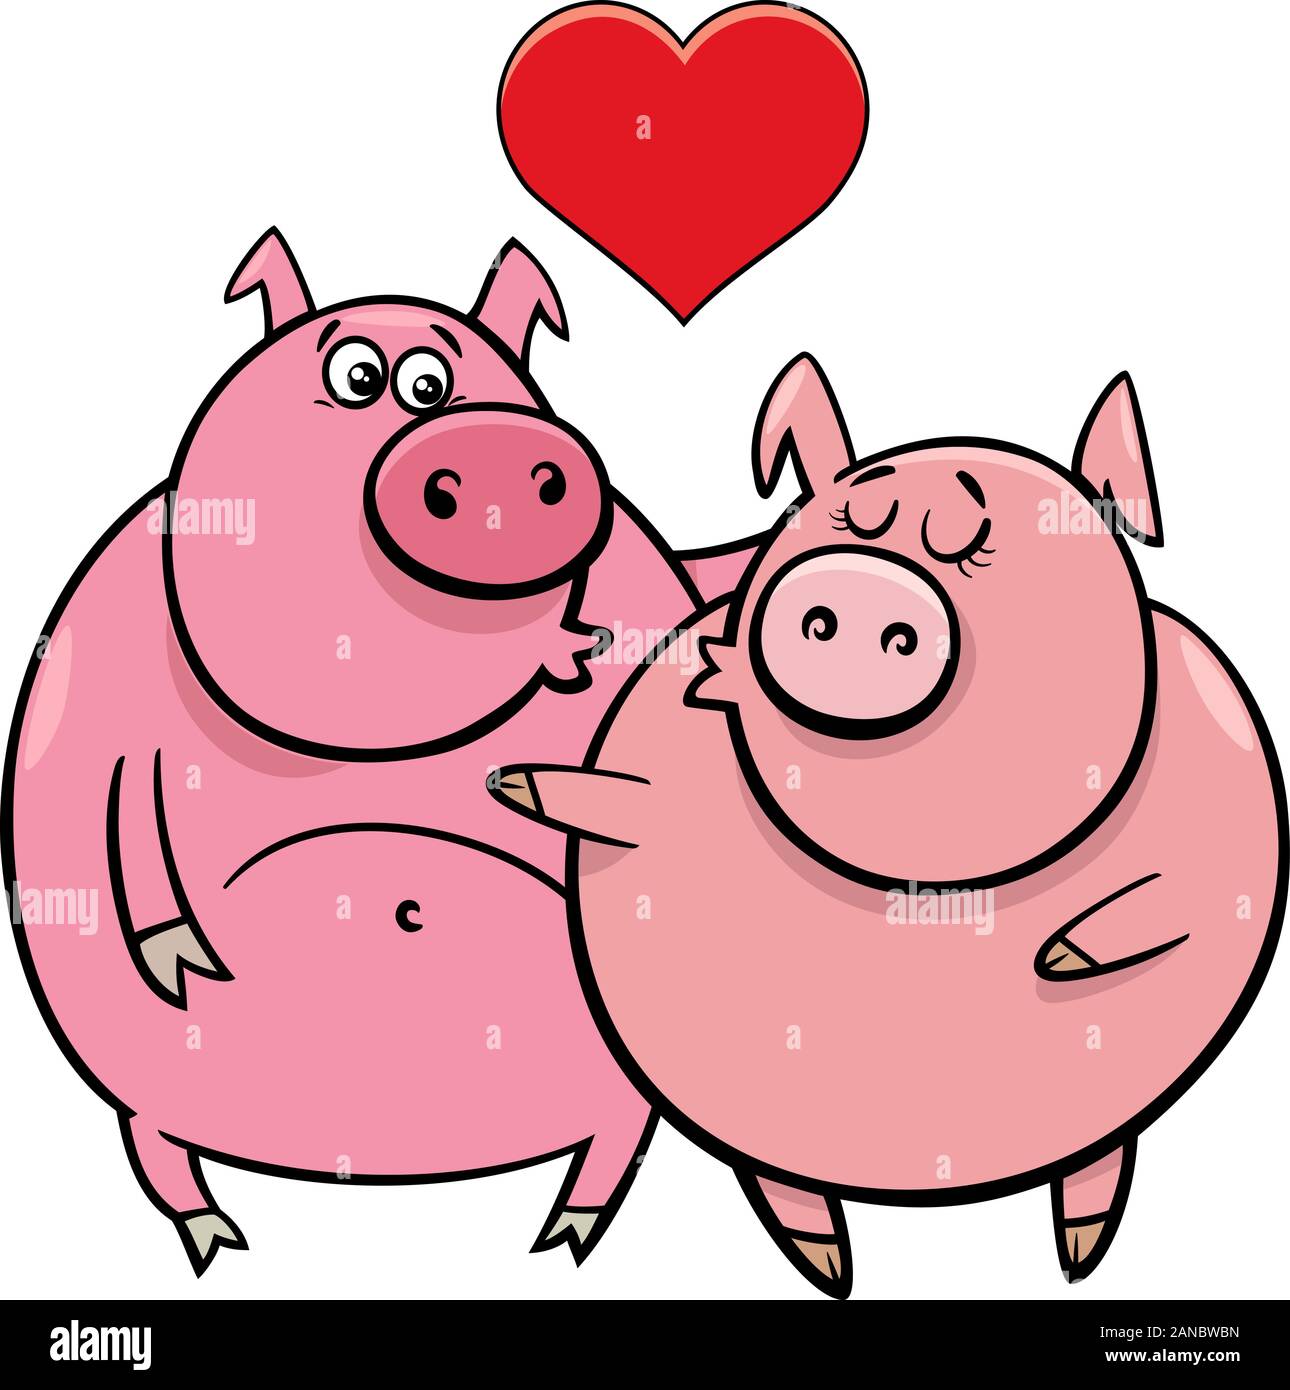 Valentines Day Greeting Card Cartoon Illustration with Pig Characters in Love Stock Vector